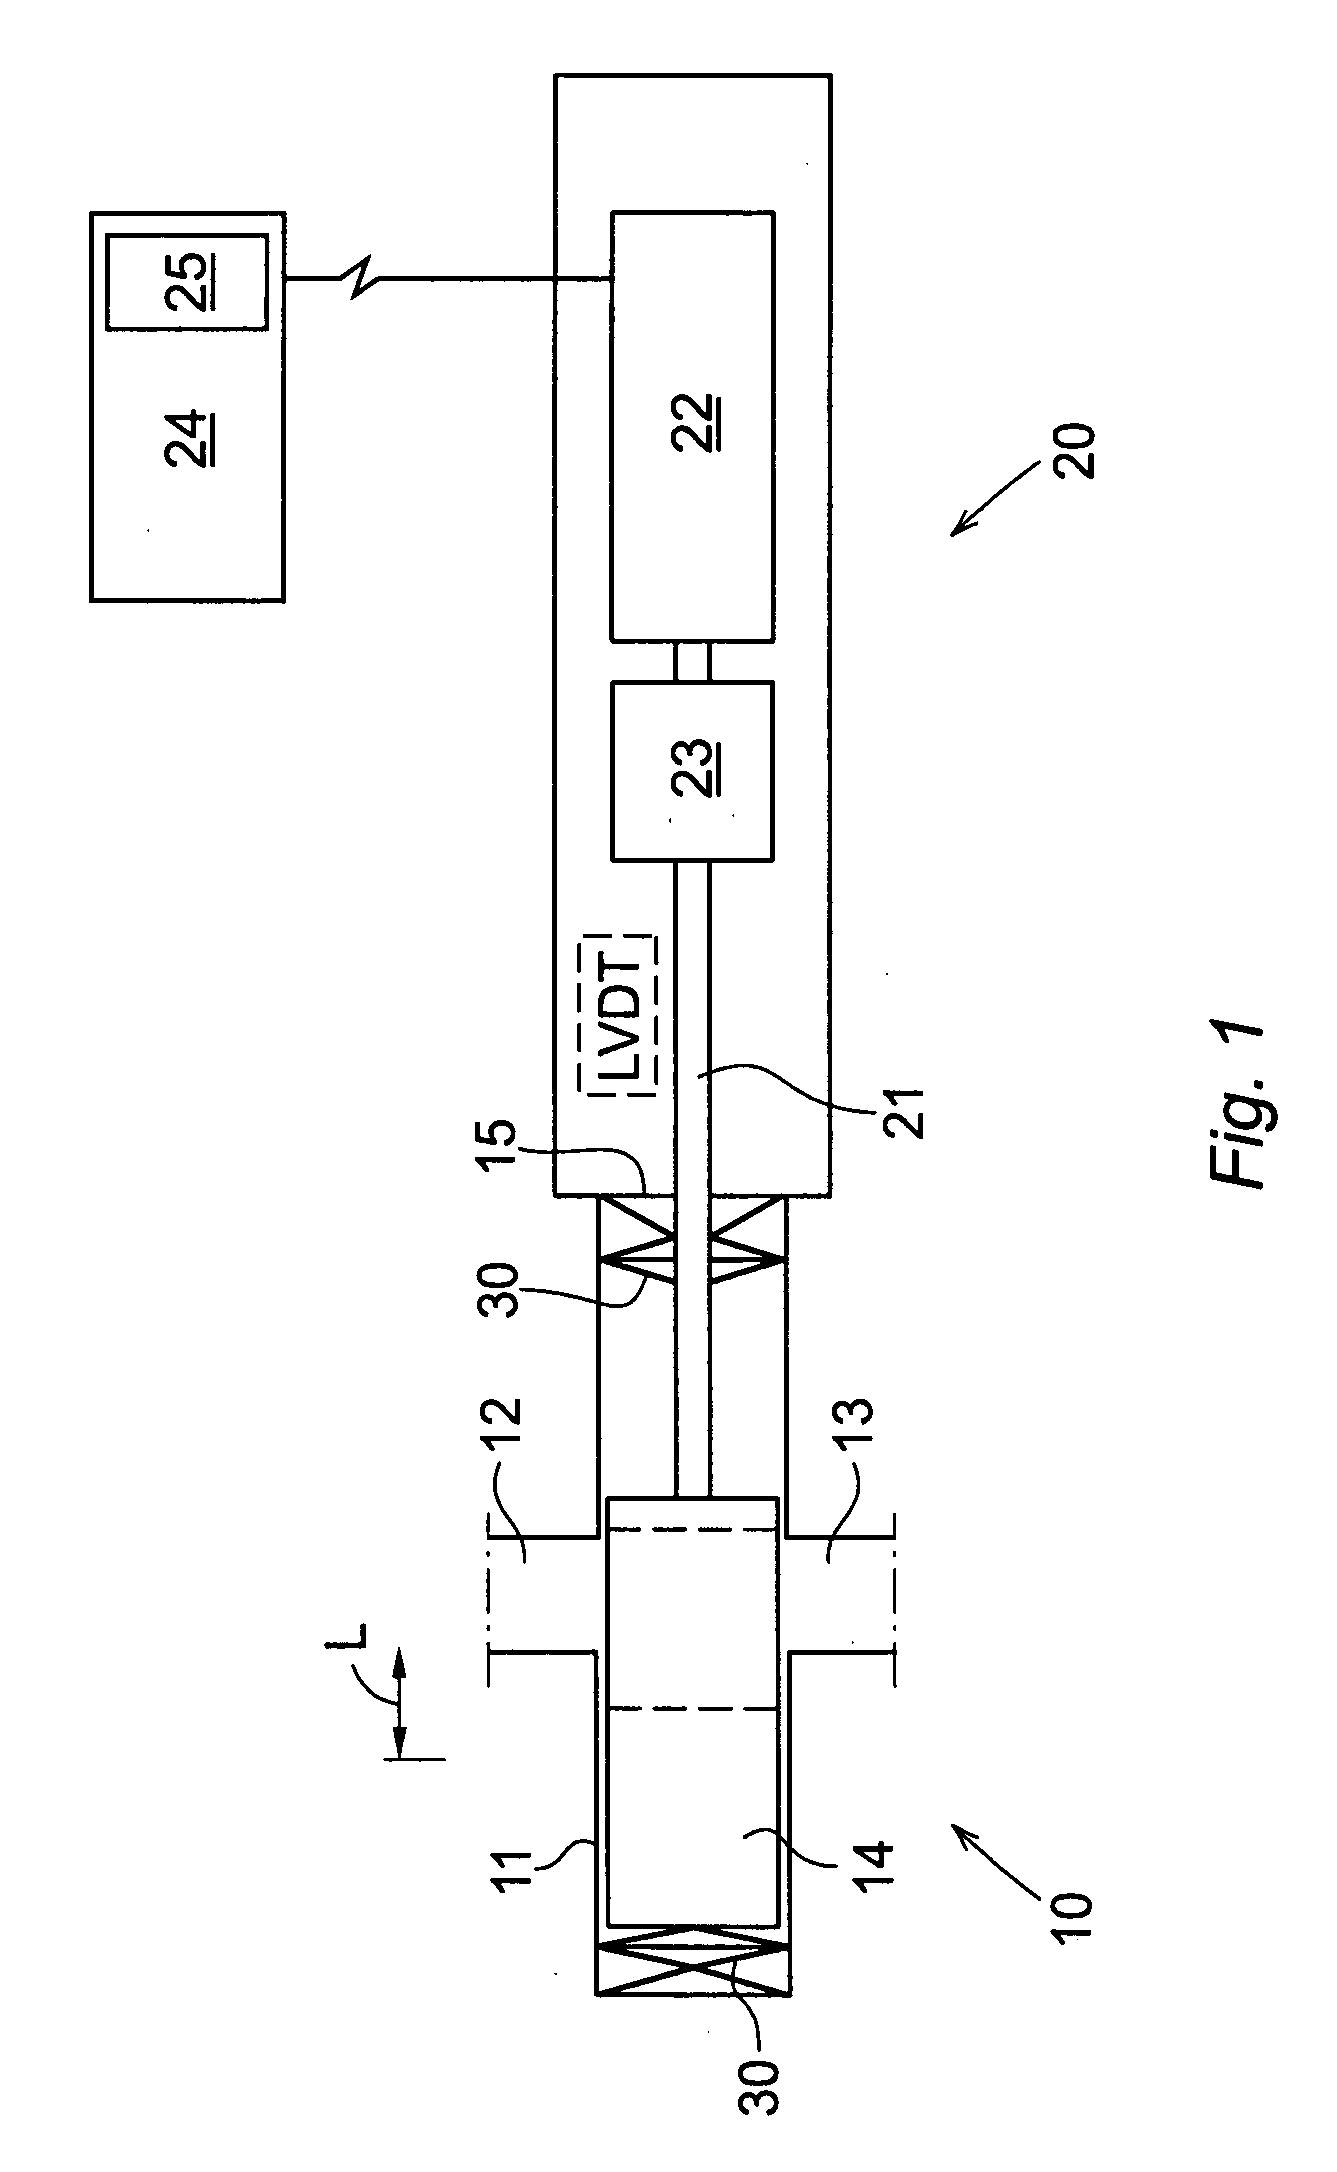 Electrically operated valve actuator with electro-mechanical end stop detection device